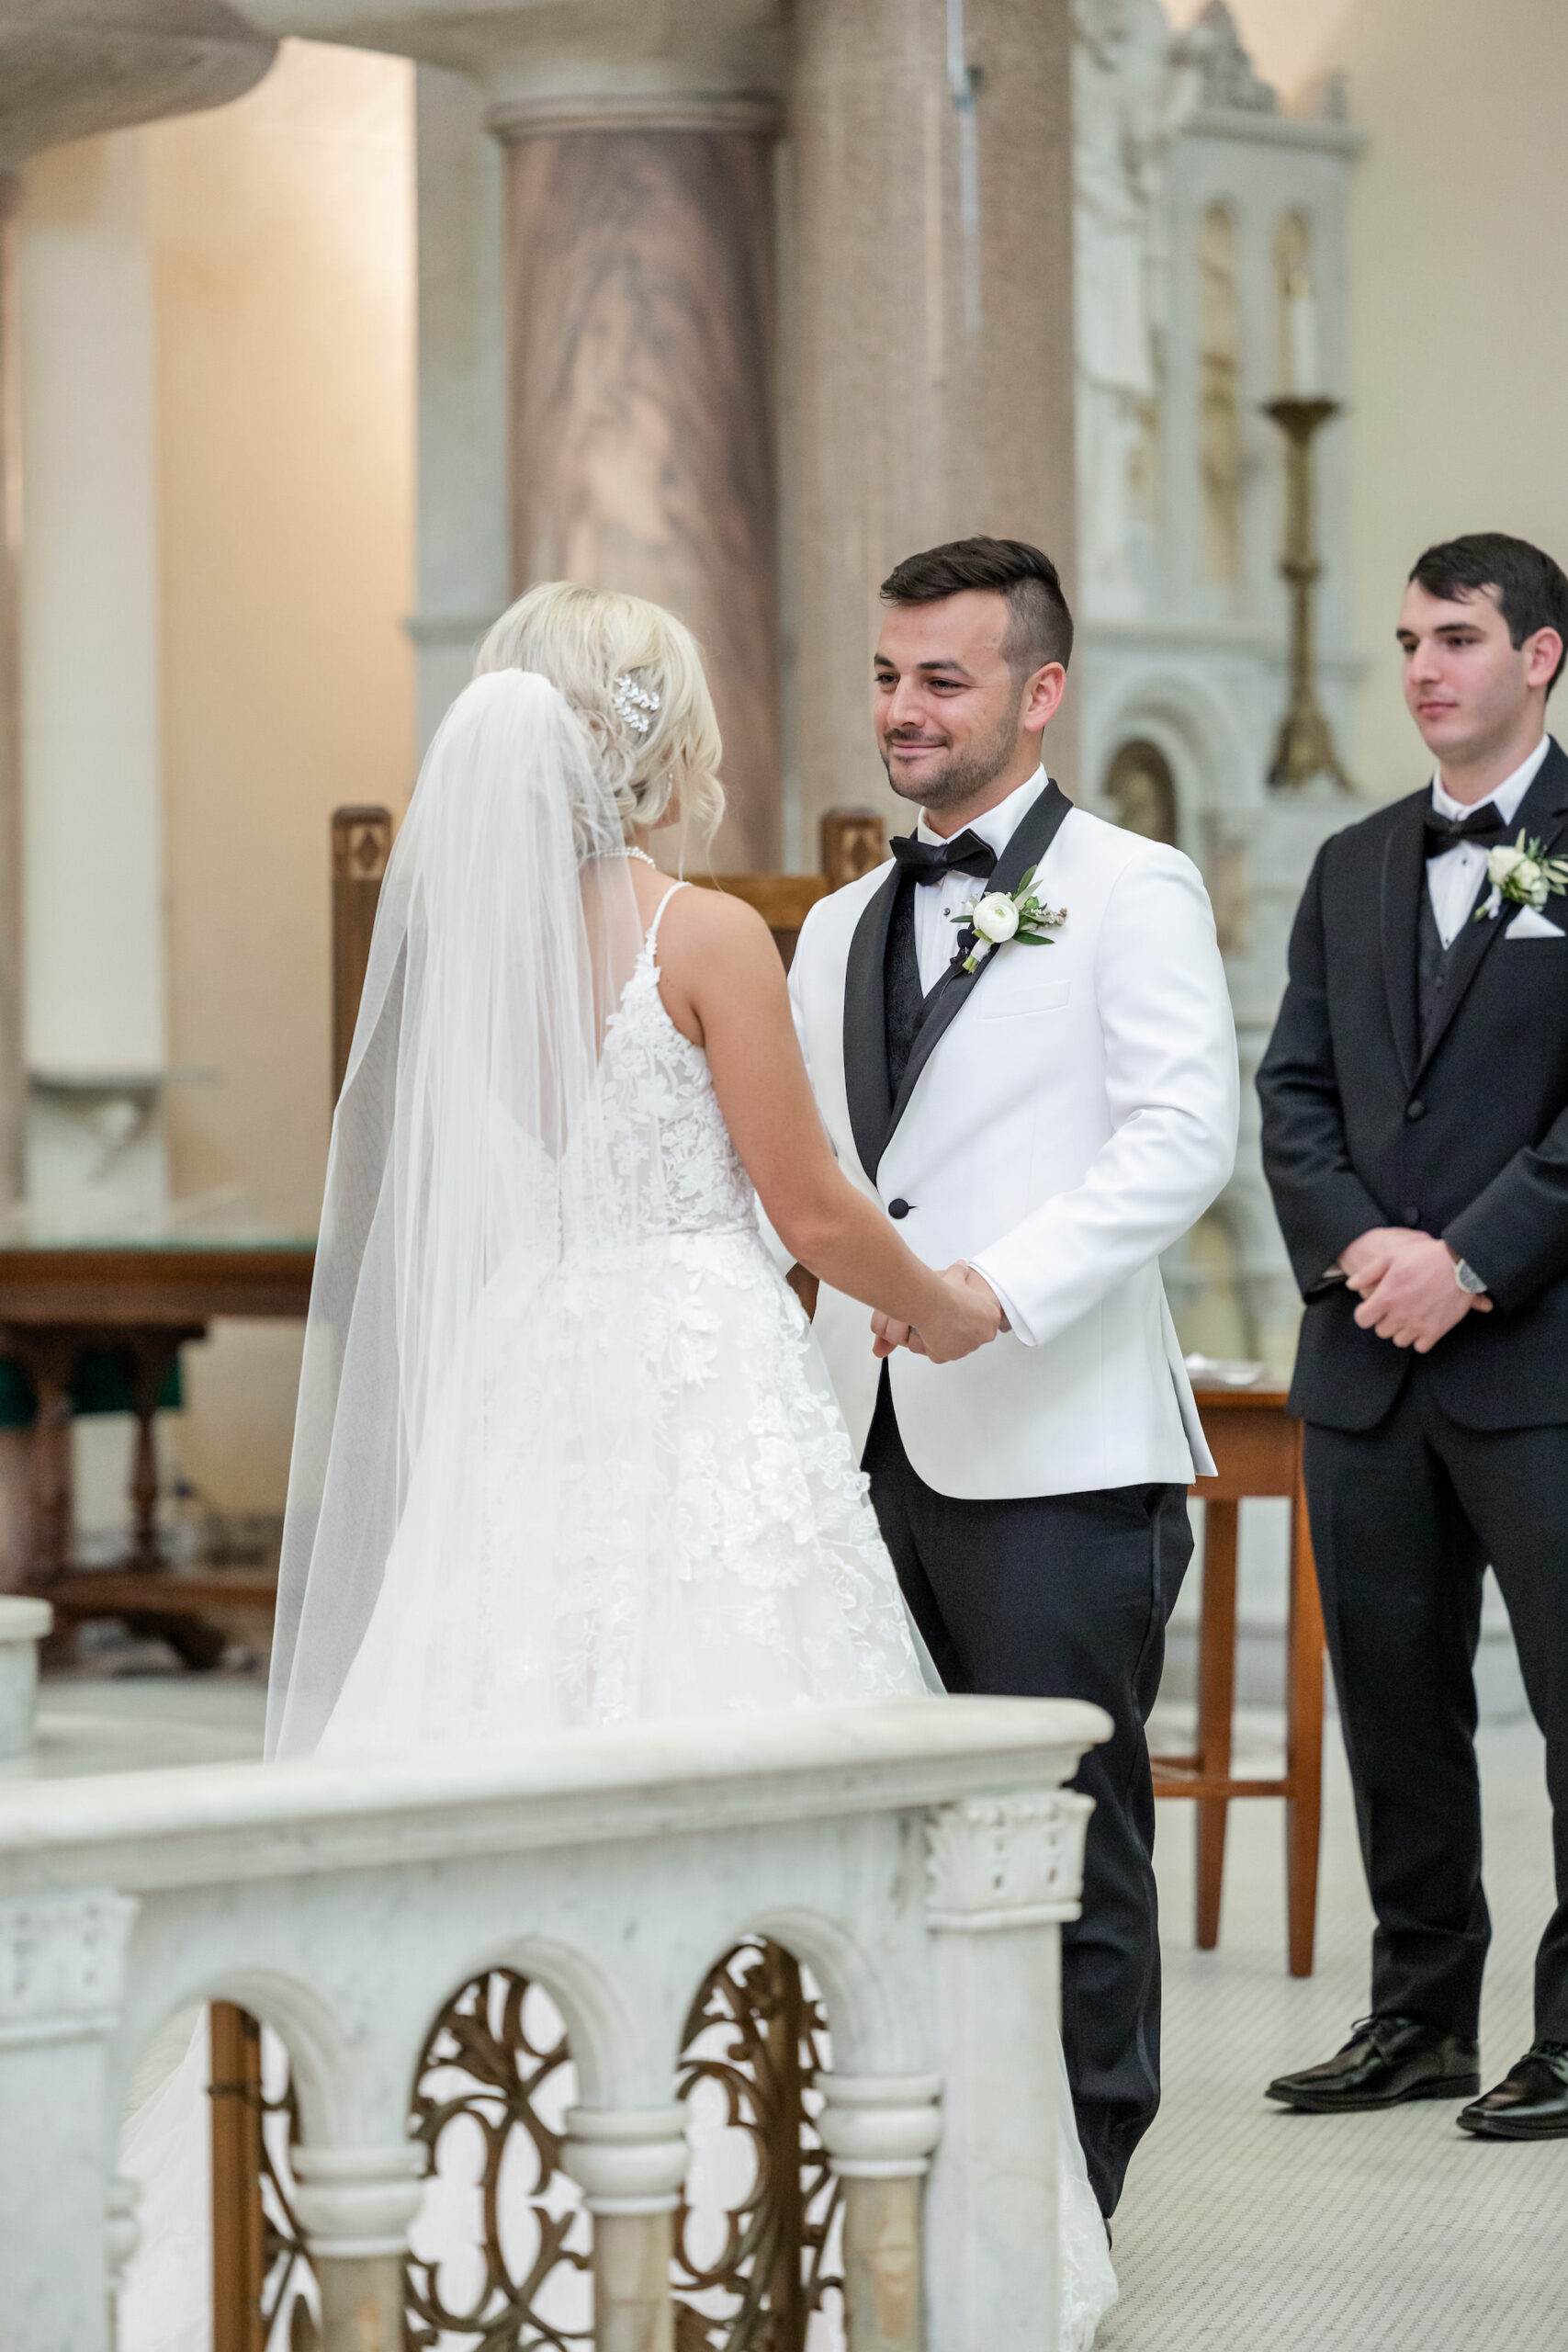 Modern Romantic Bride and Groom Exchanging Wedding Vows During Traditional Church Wedding | Tampa Bay Wedding Venue Sacred Heart Catholic Church